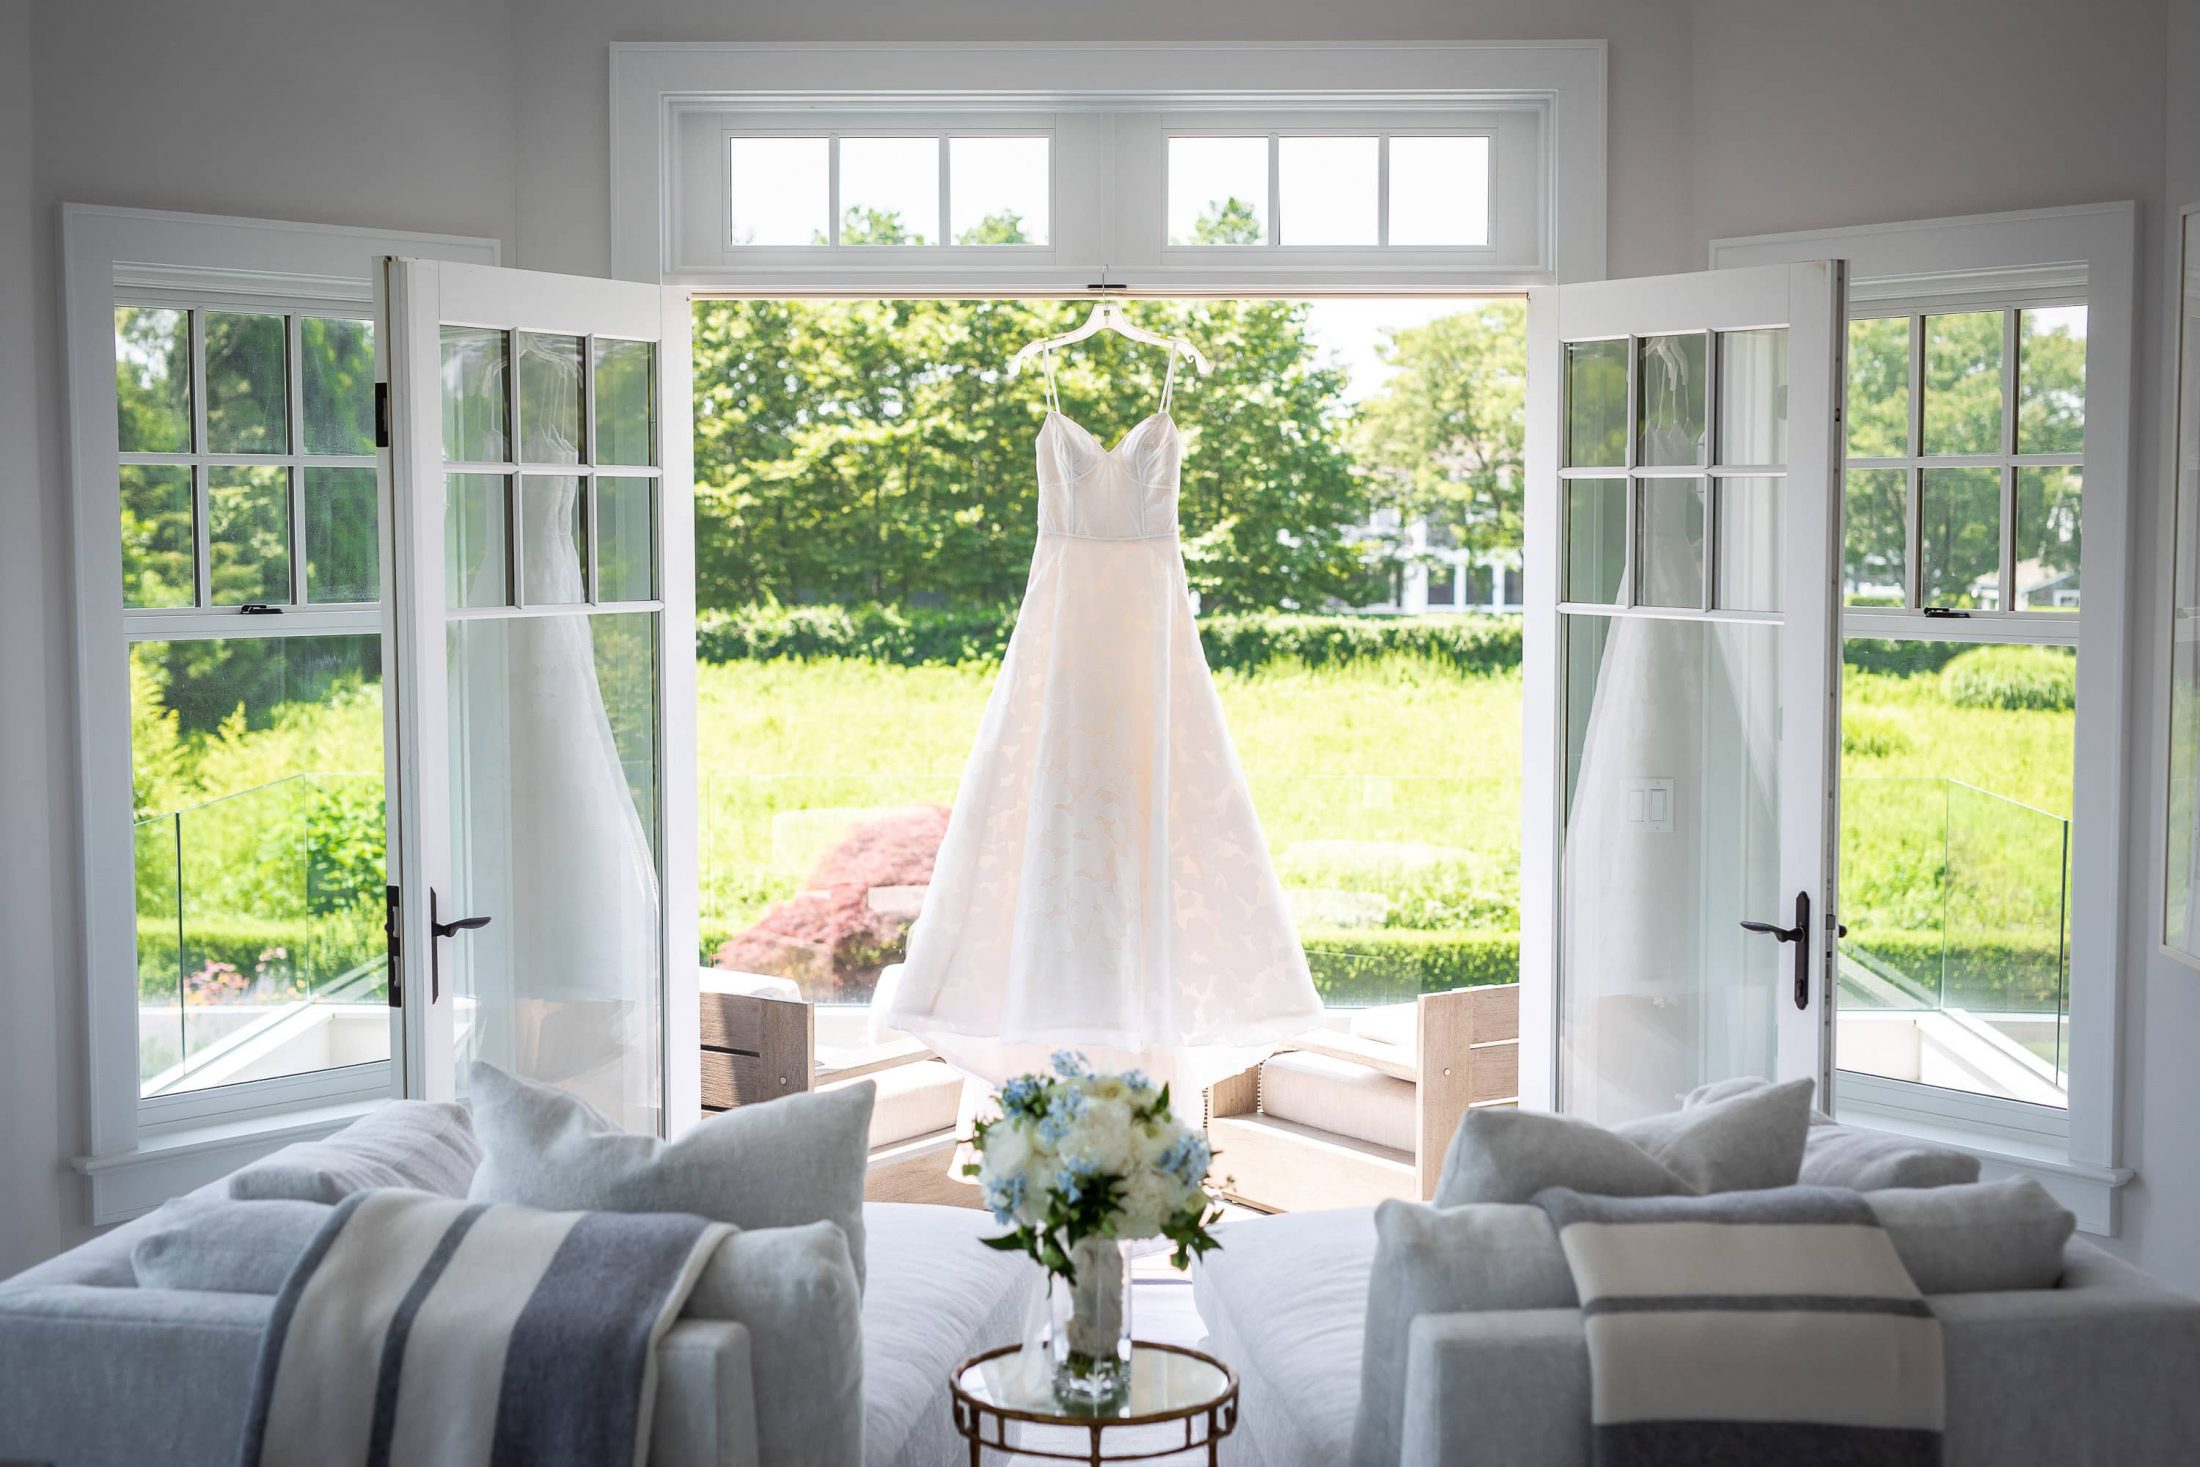 Wedding dress at this Hamptons wedding weekend held at The Parrish Museum | Photo by Roey Yohai Studio